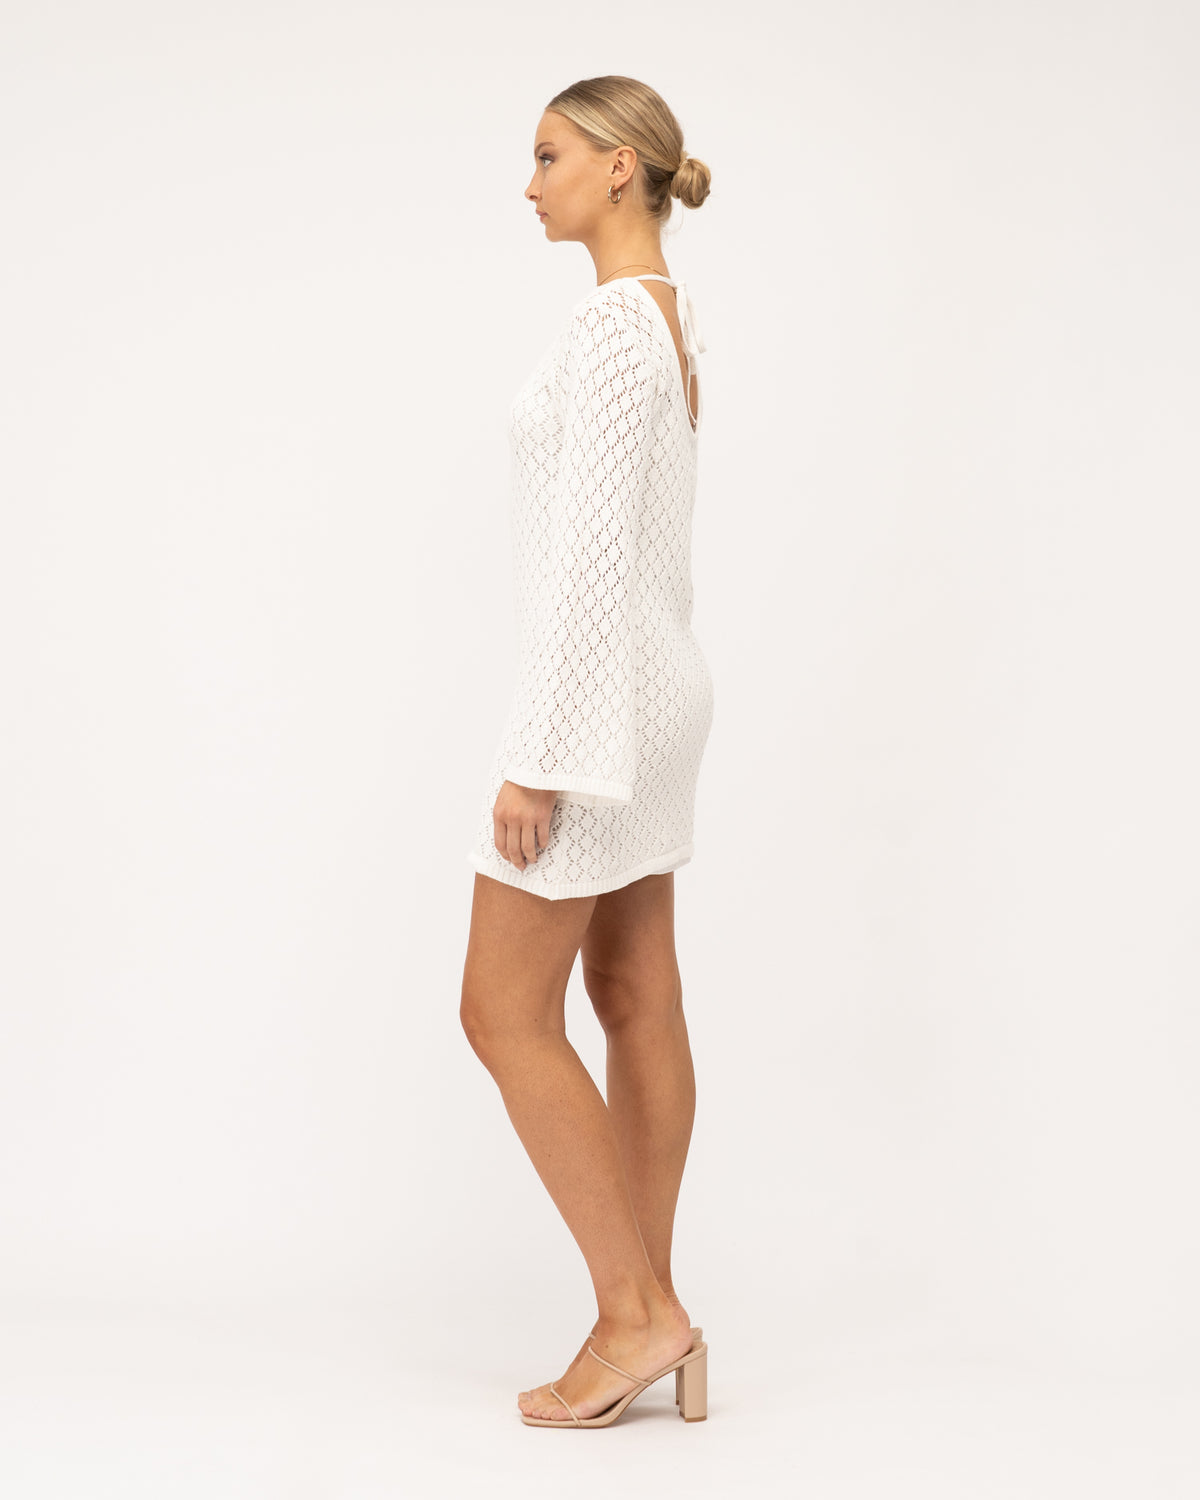 A model wearing white long sleeve crochet mini dress with loose sleeves and round neckline from Paper Heart collection designed by Global Fashion House.